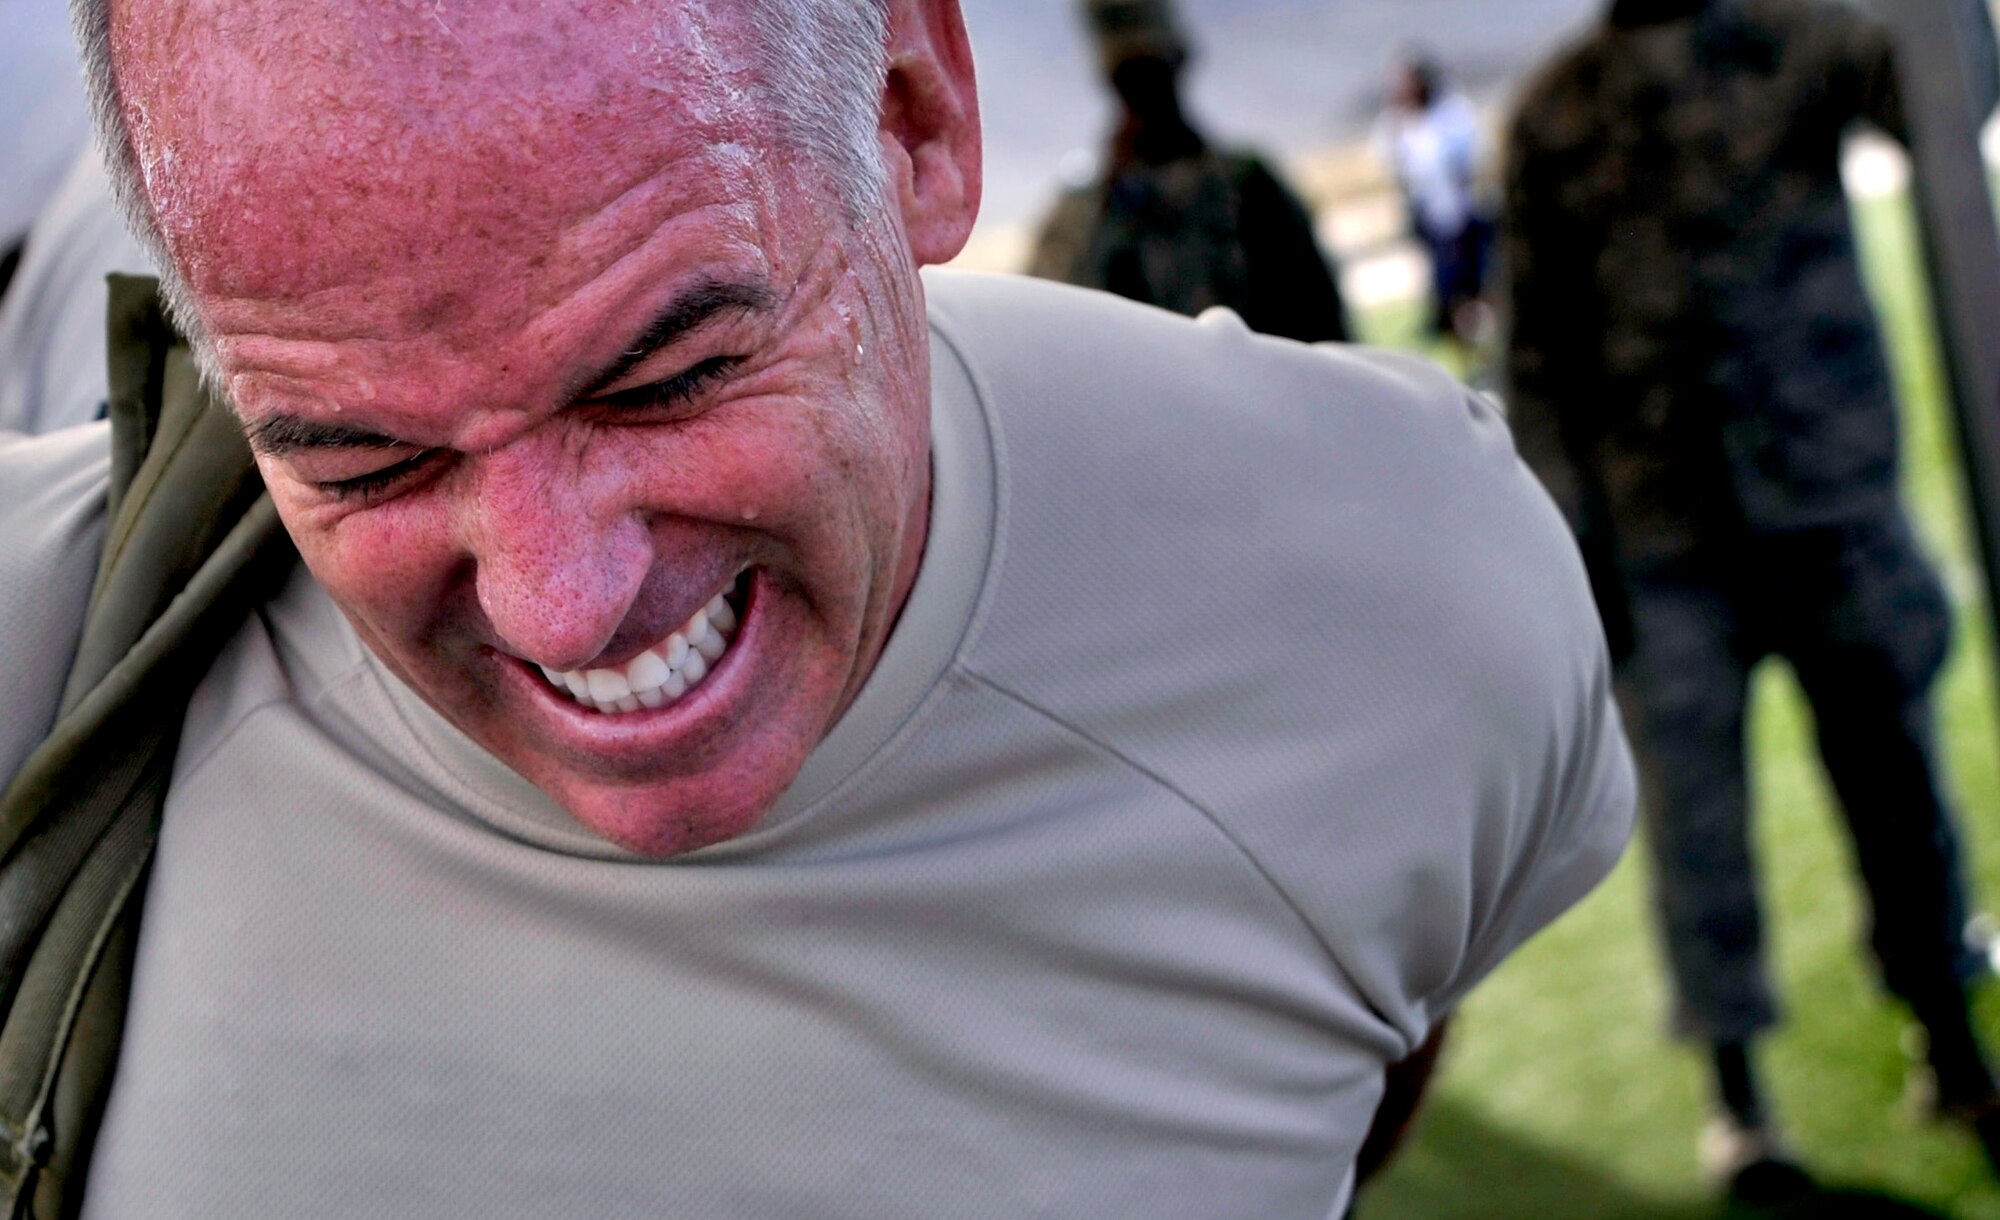 Chief Master Sgt. Butch Brien, 432nd Wing/432nd Air Expeditionary Wing Command Chief, puts on a ruck-sack before a team ruck march during the Combat Challenge July 11, 2014, at Creech Air Force Base, Nev. The Combat Challenge consisted of eight security forces-related challenges such as an M-4 Rifle breakdown and reassembly, team pull-ups, tire flips, low crawls and more. (U.S. Air Force photo by Airman 1st Class Christian Clausen/Released)